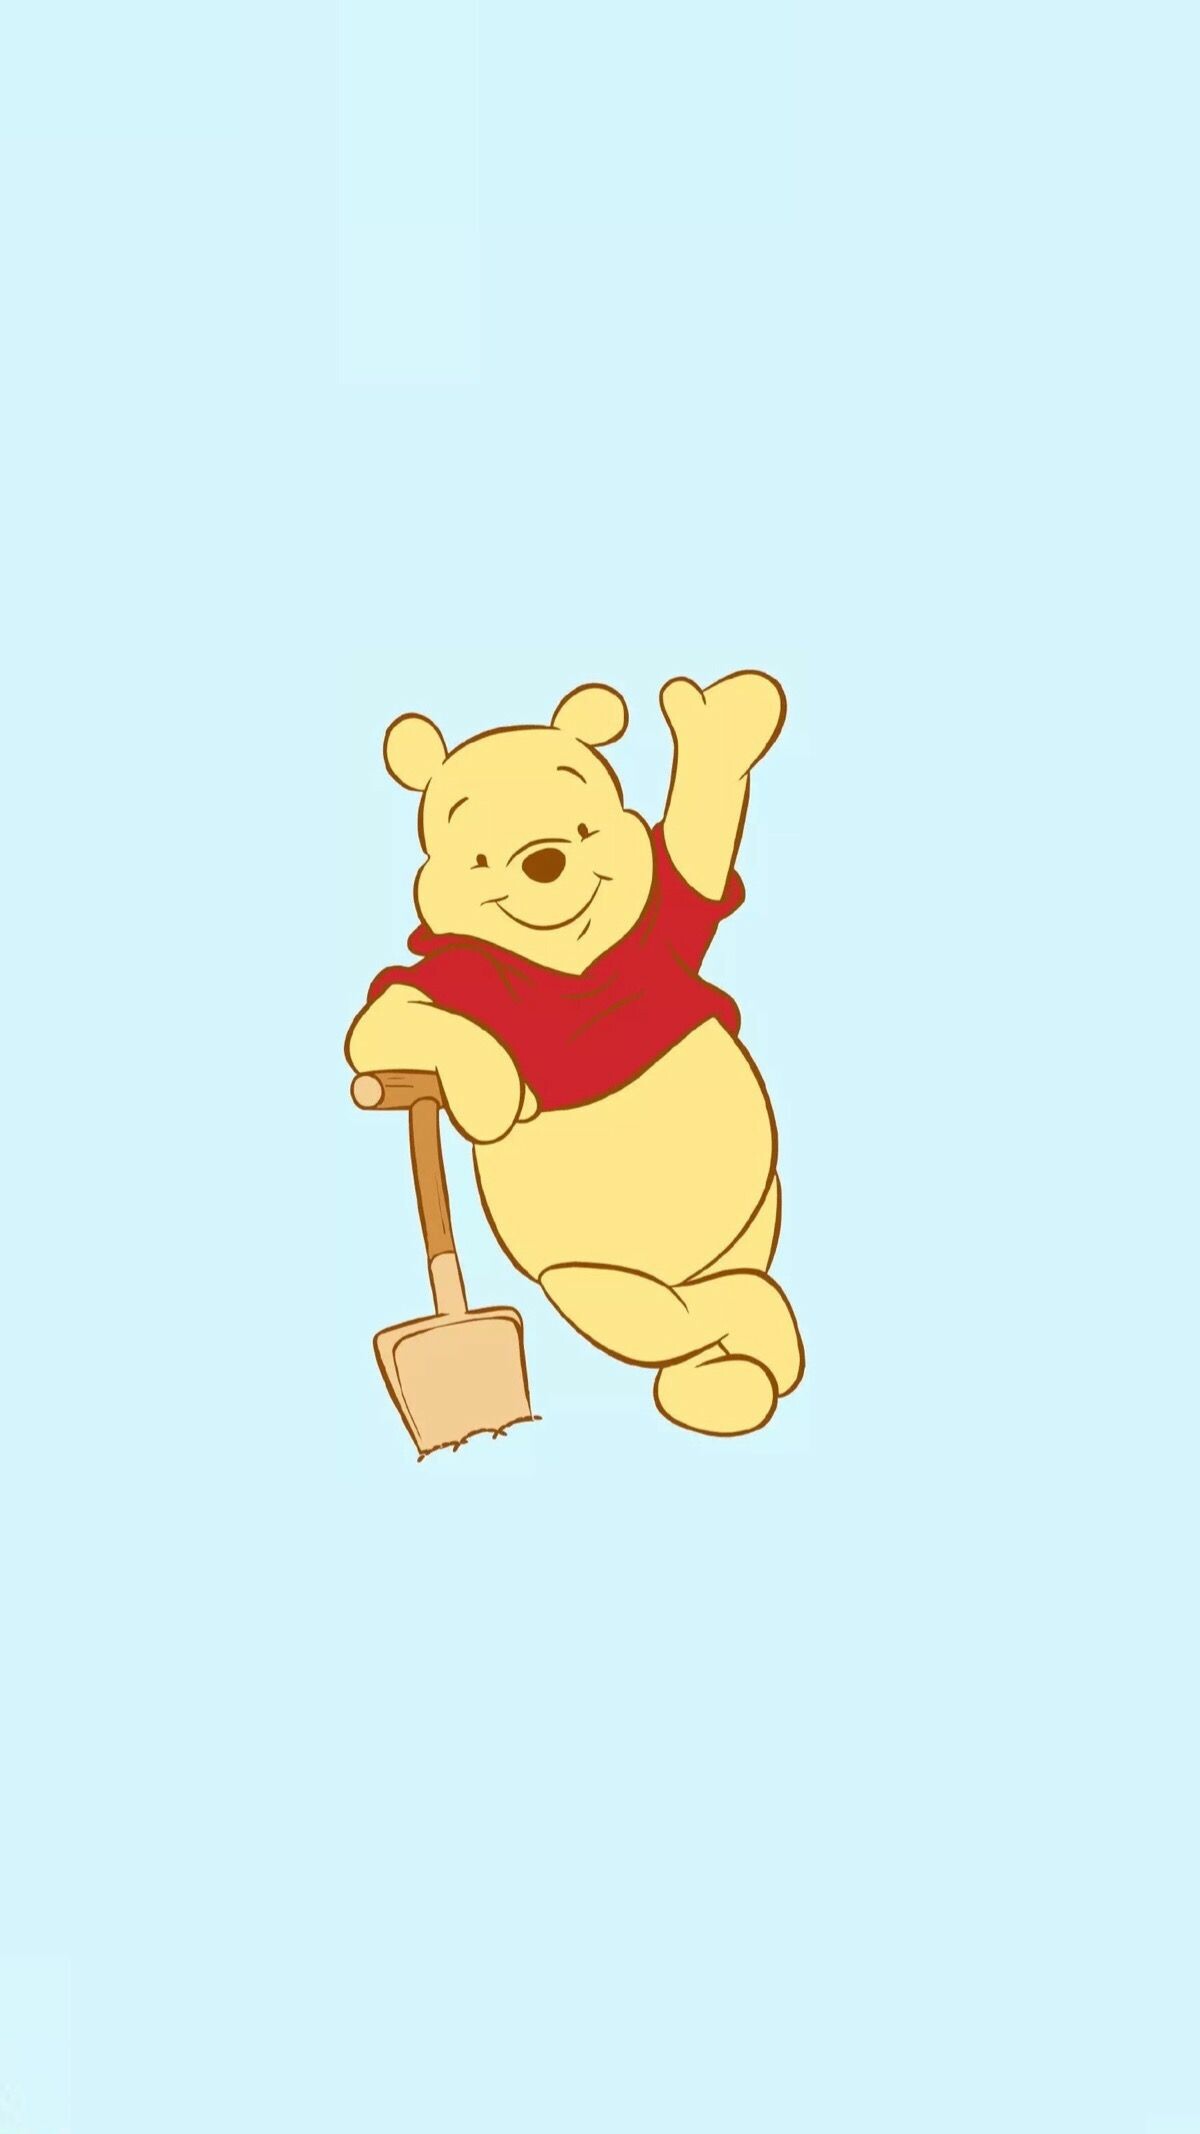 The Many Adventures of Winnie the Pooh: A fictional anthropomorphic teddy bear created by English author A. A. Milne and English illustrator E. H. Shepard. 1200x2140 HD Background.